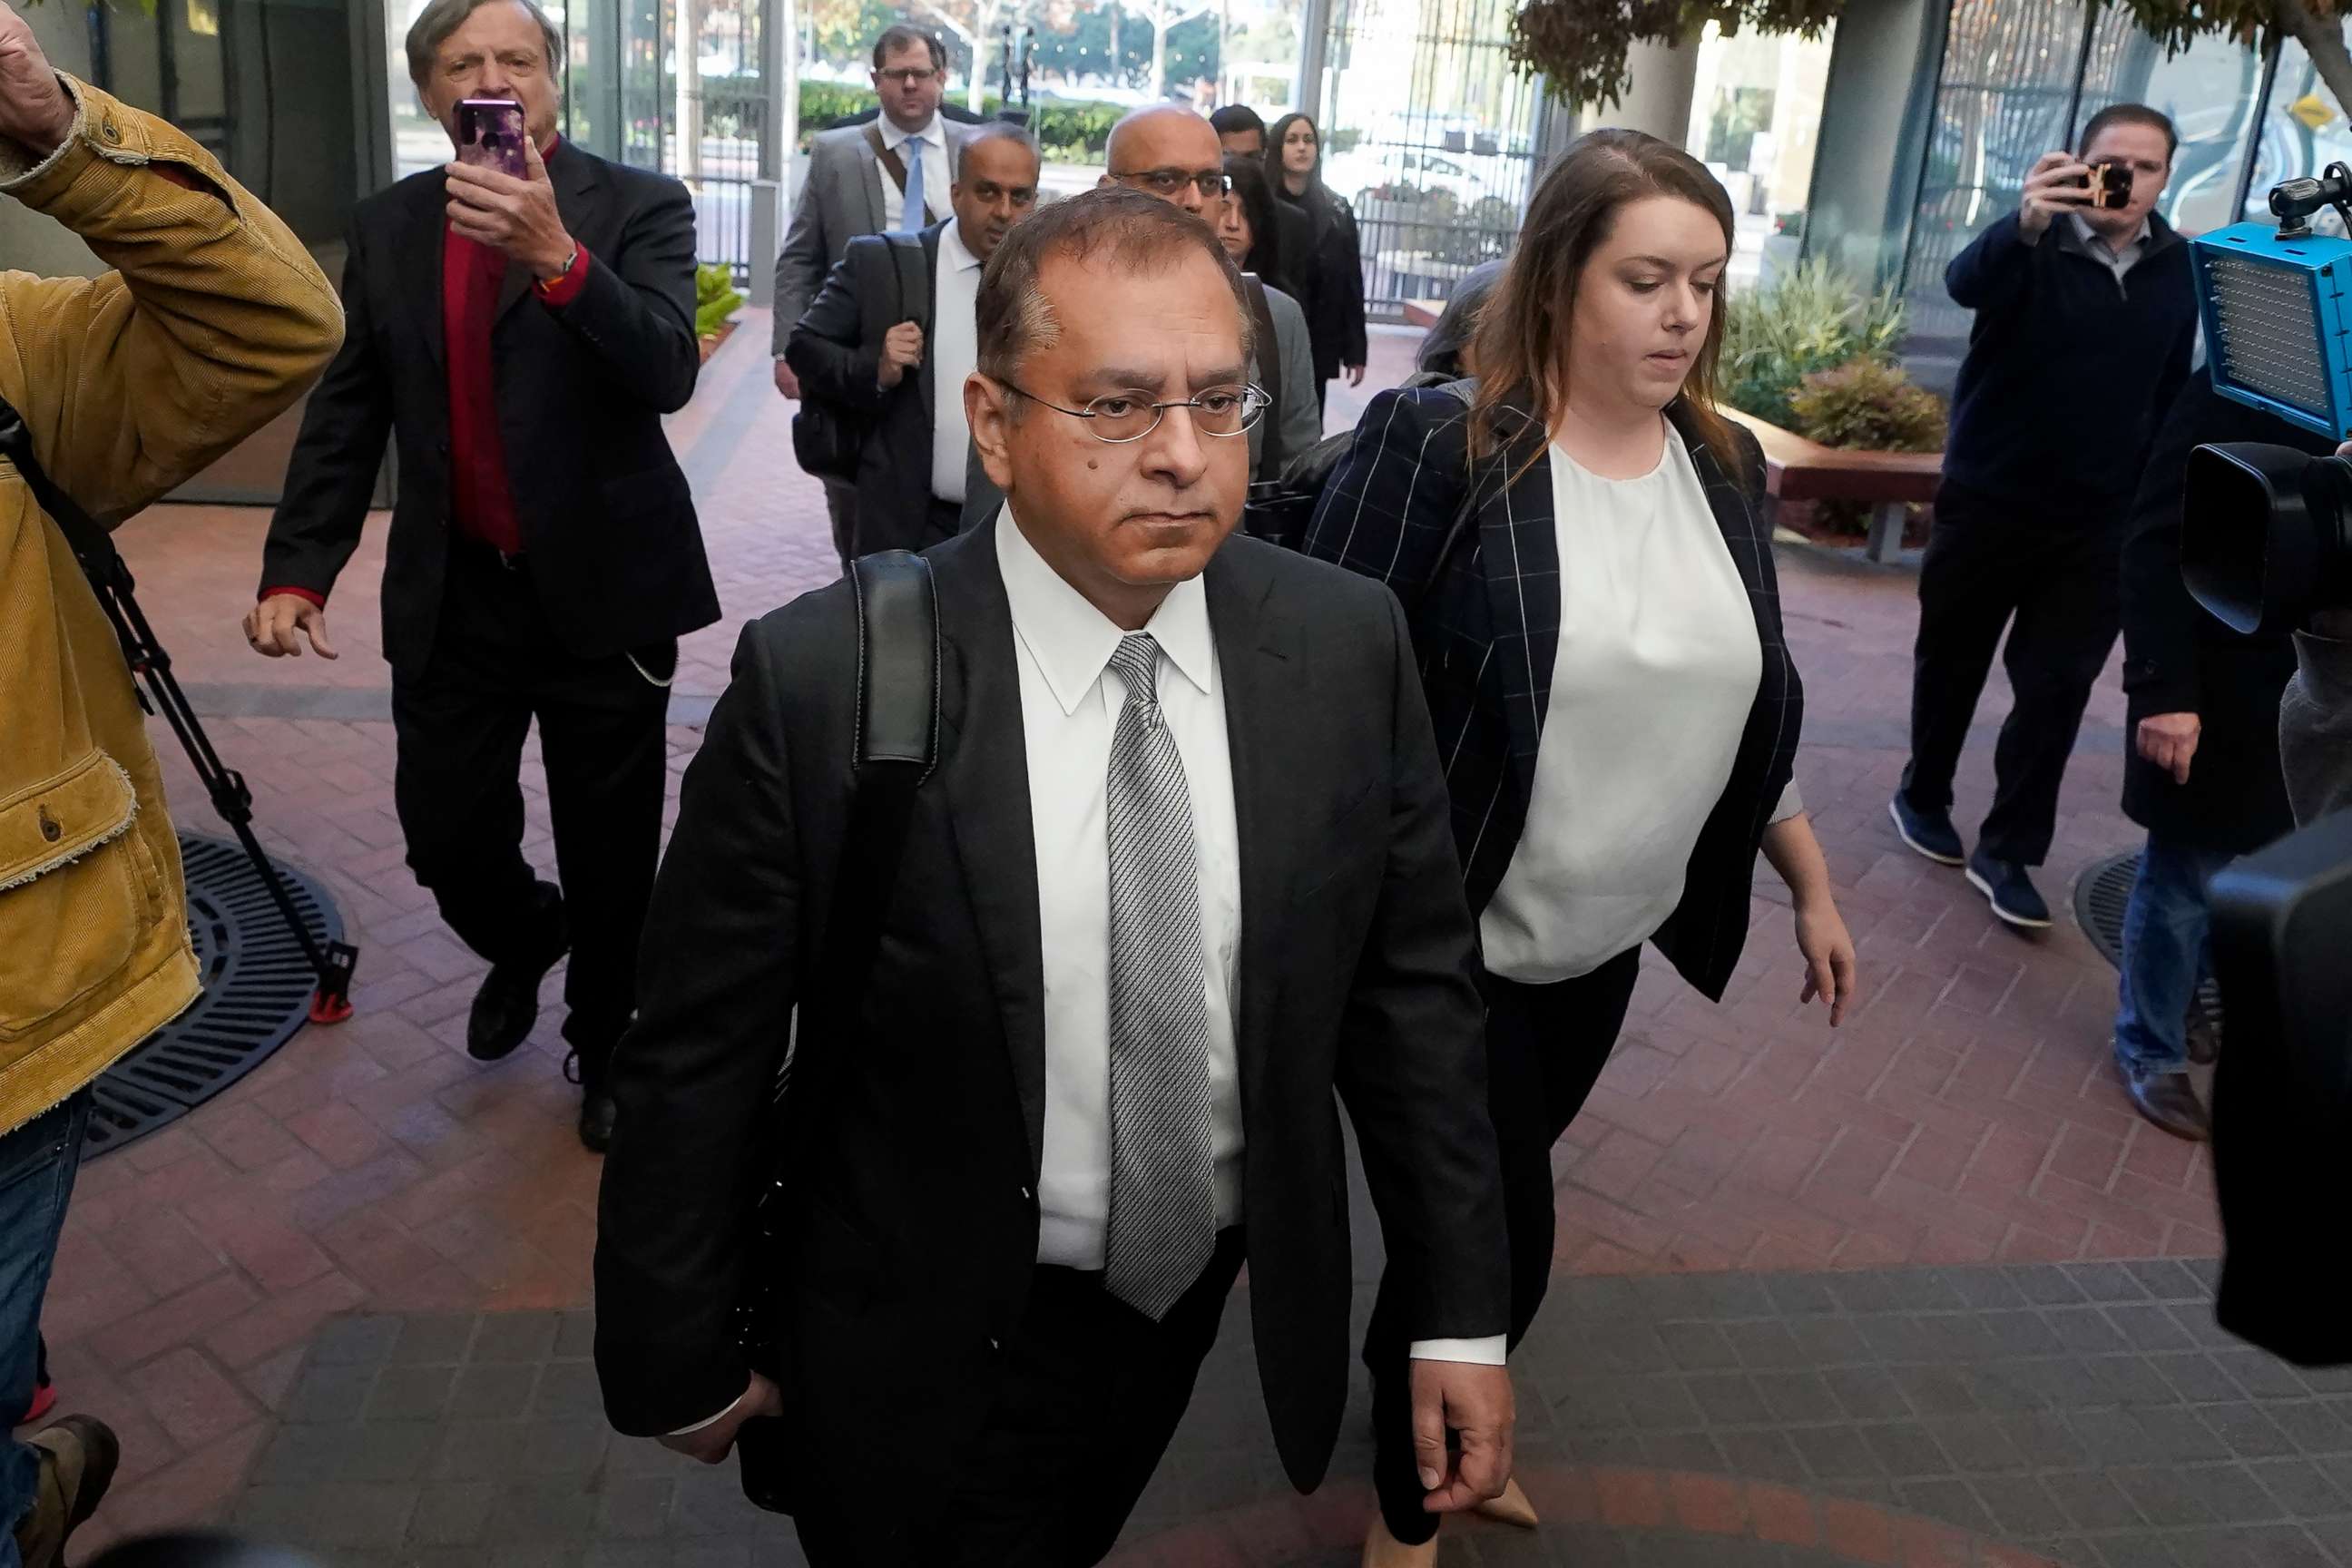 PHOTO: Ramesh "Sunny" Balwani, the former lover and business partner of Theranos CEO Elizabeth Holmes, arrives at federal court in San Jose, Calif., Wednesday, Dec. 7, 2022.